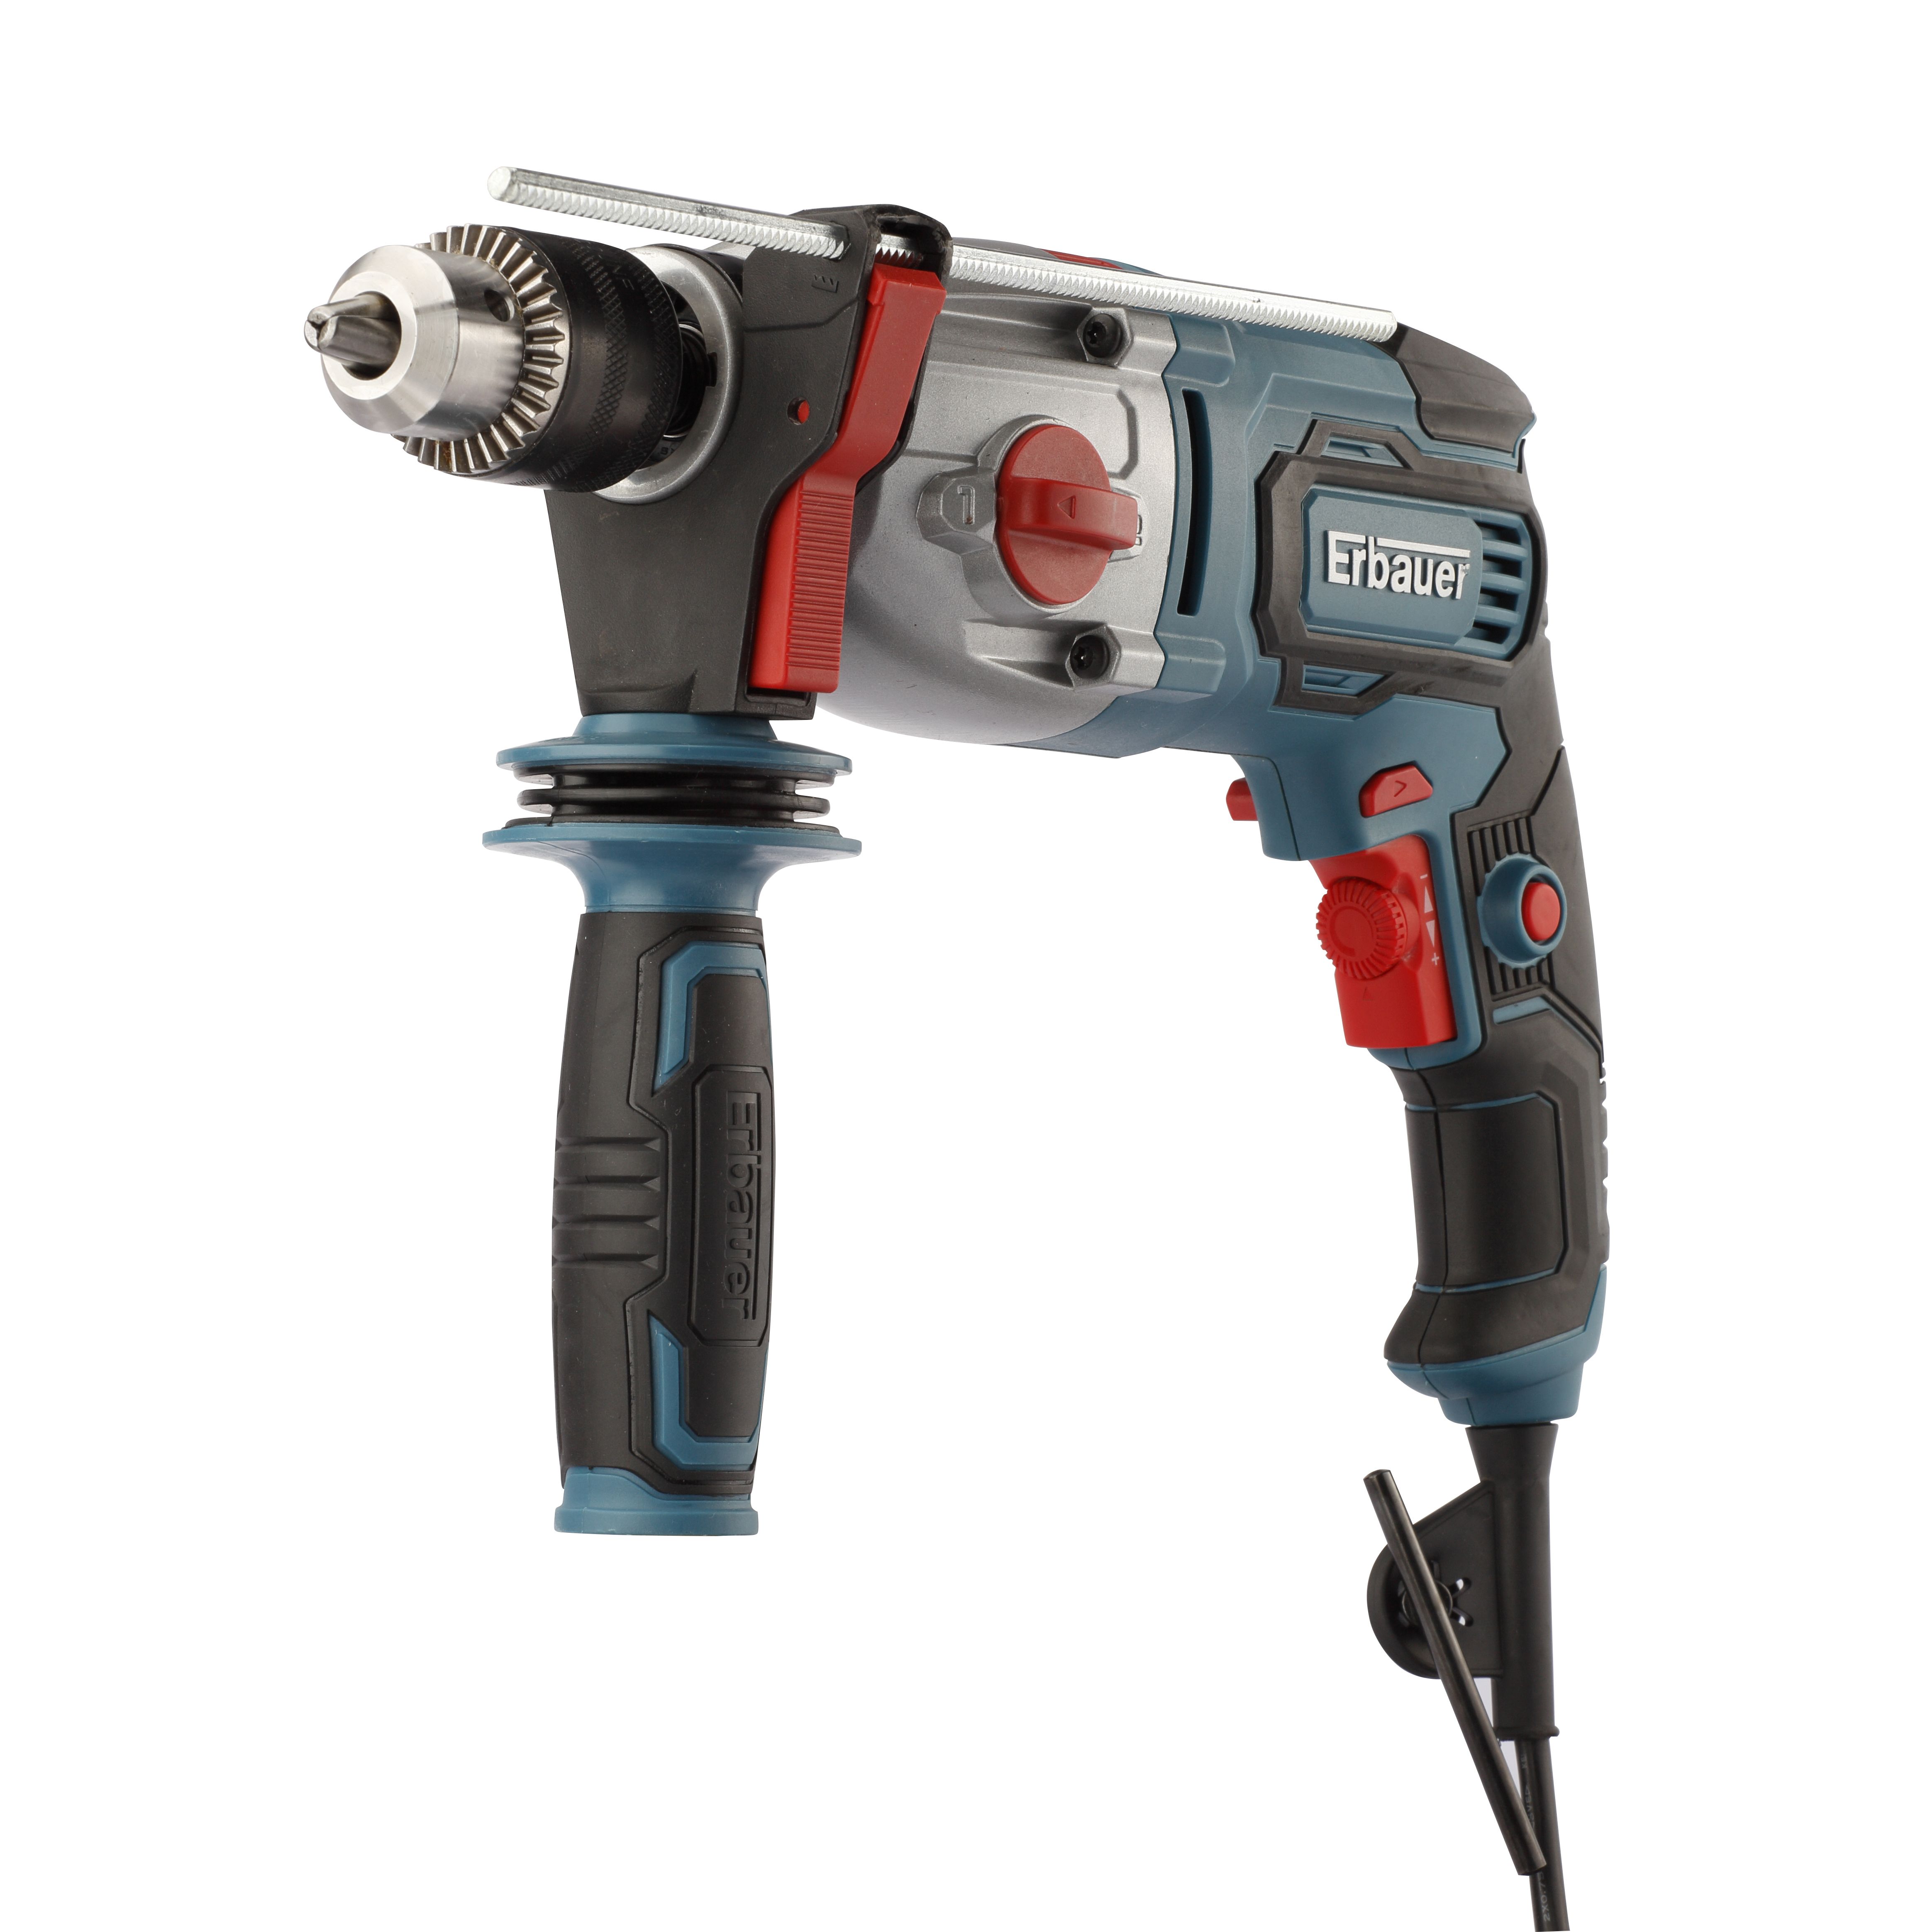 https://media.diy.com/is/image/Kingfisher/erbauer-240v-800w-corded-hammer-drill-ehd800-2~3663602784272_01bq?$MOB_PREV$&$width=618&$height=618